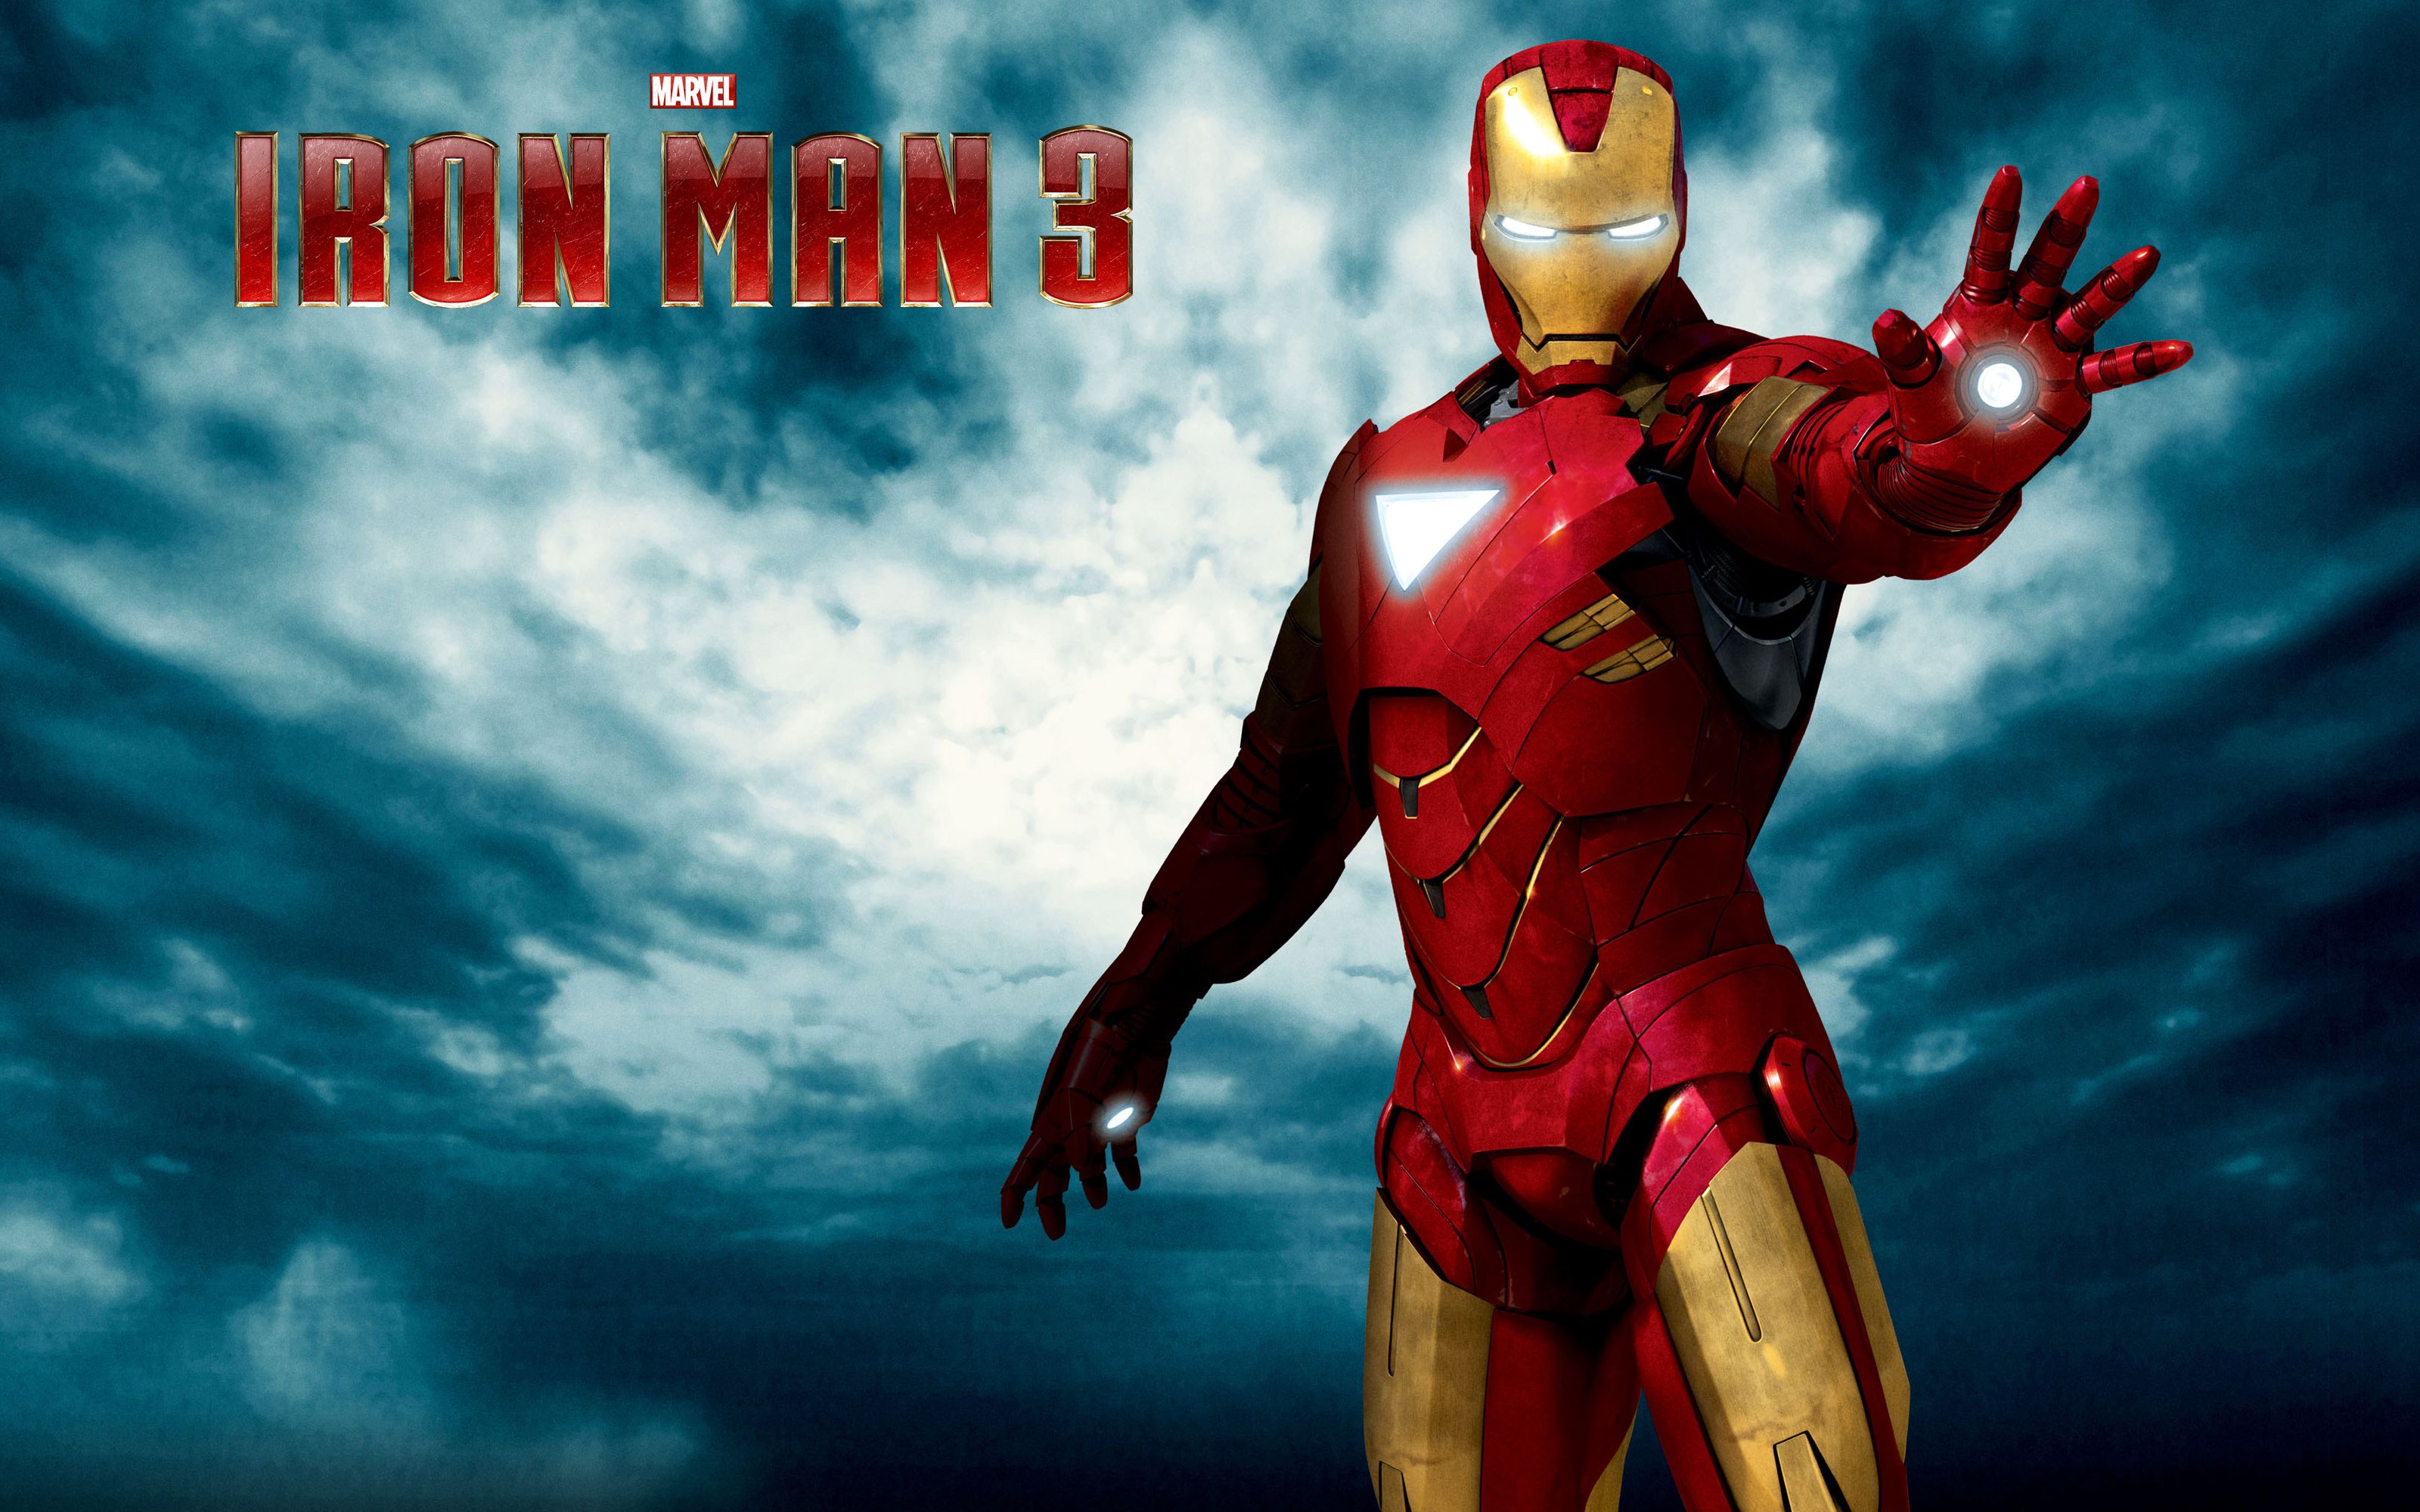 Iron Man 3 Wallpapers | HD Wallpapers